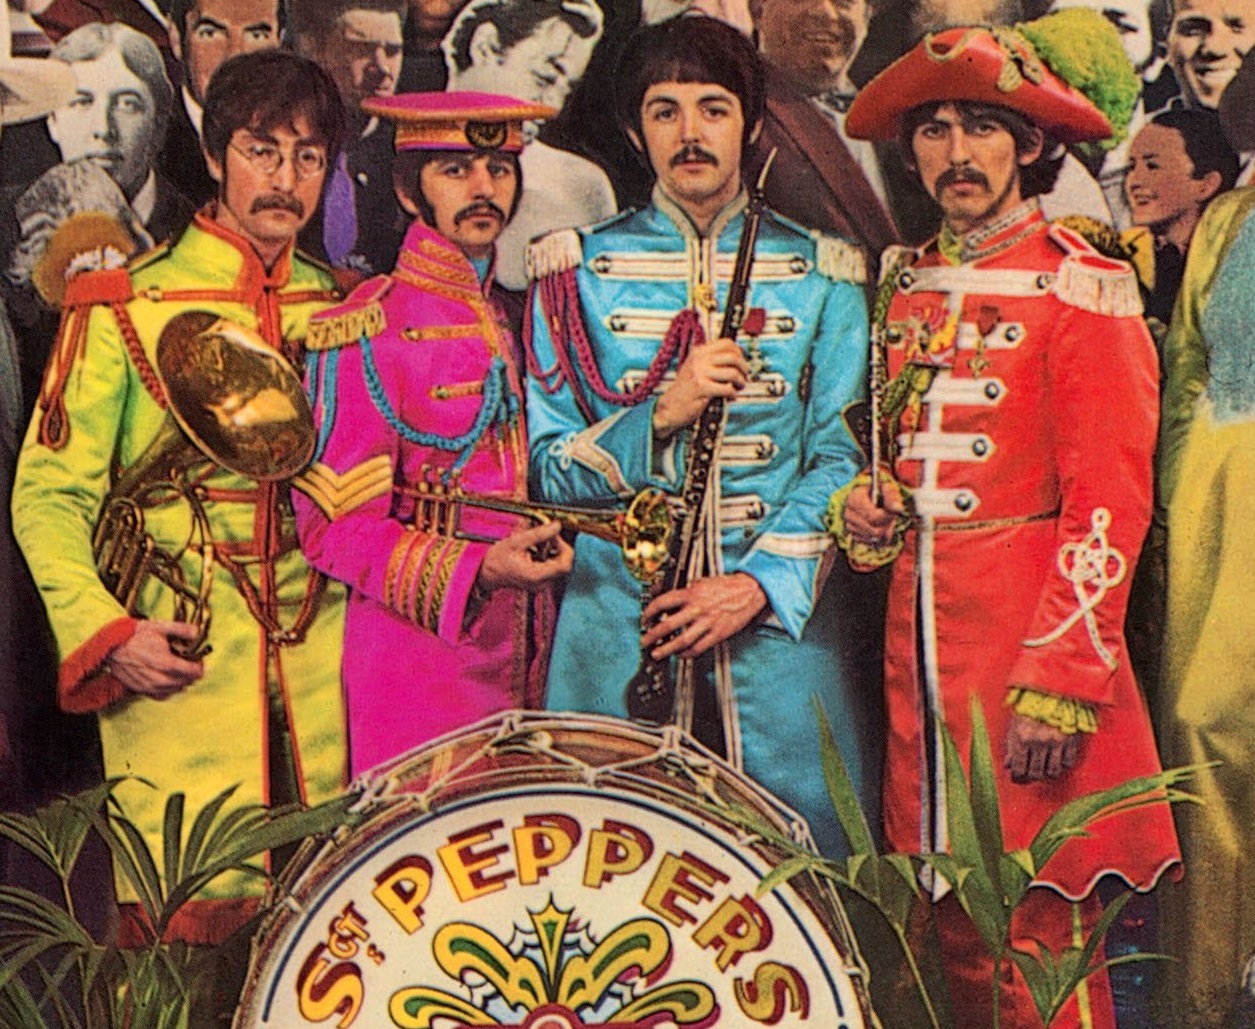 Beatles sgt peppers lonely hearts club. Битлз сержант Пеппер. Sgt Pepper s Lonely Hearts Club Band. Sgt. Pepper’s Lonely Hearts Club Band the Beatles. The Beatles Sgt. Pepper's Lonely Hearts Club Band 1967.